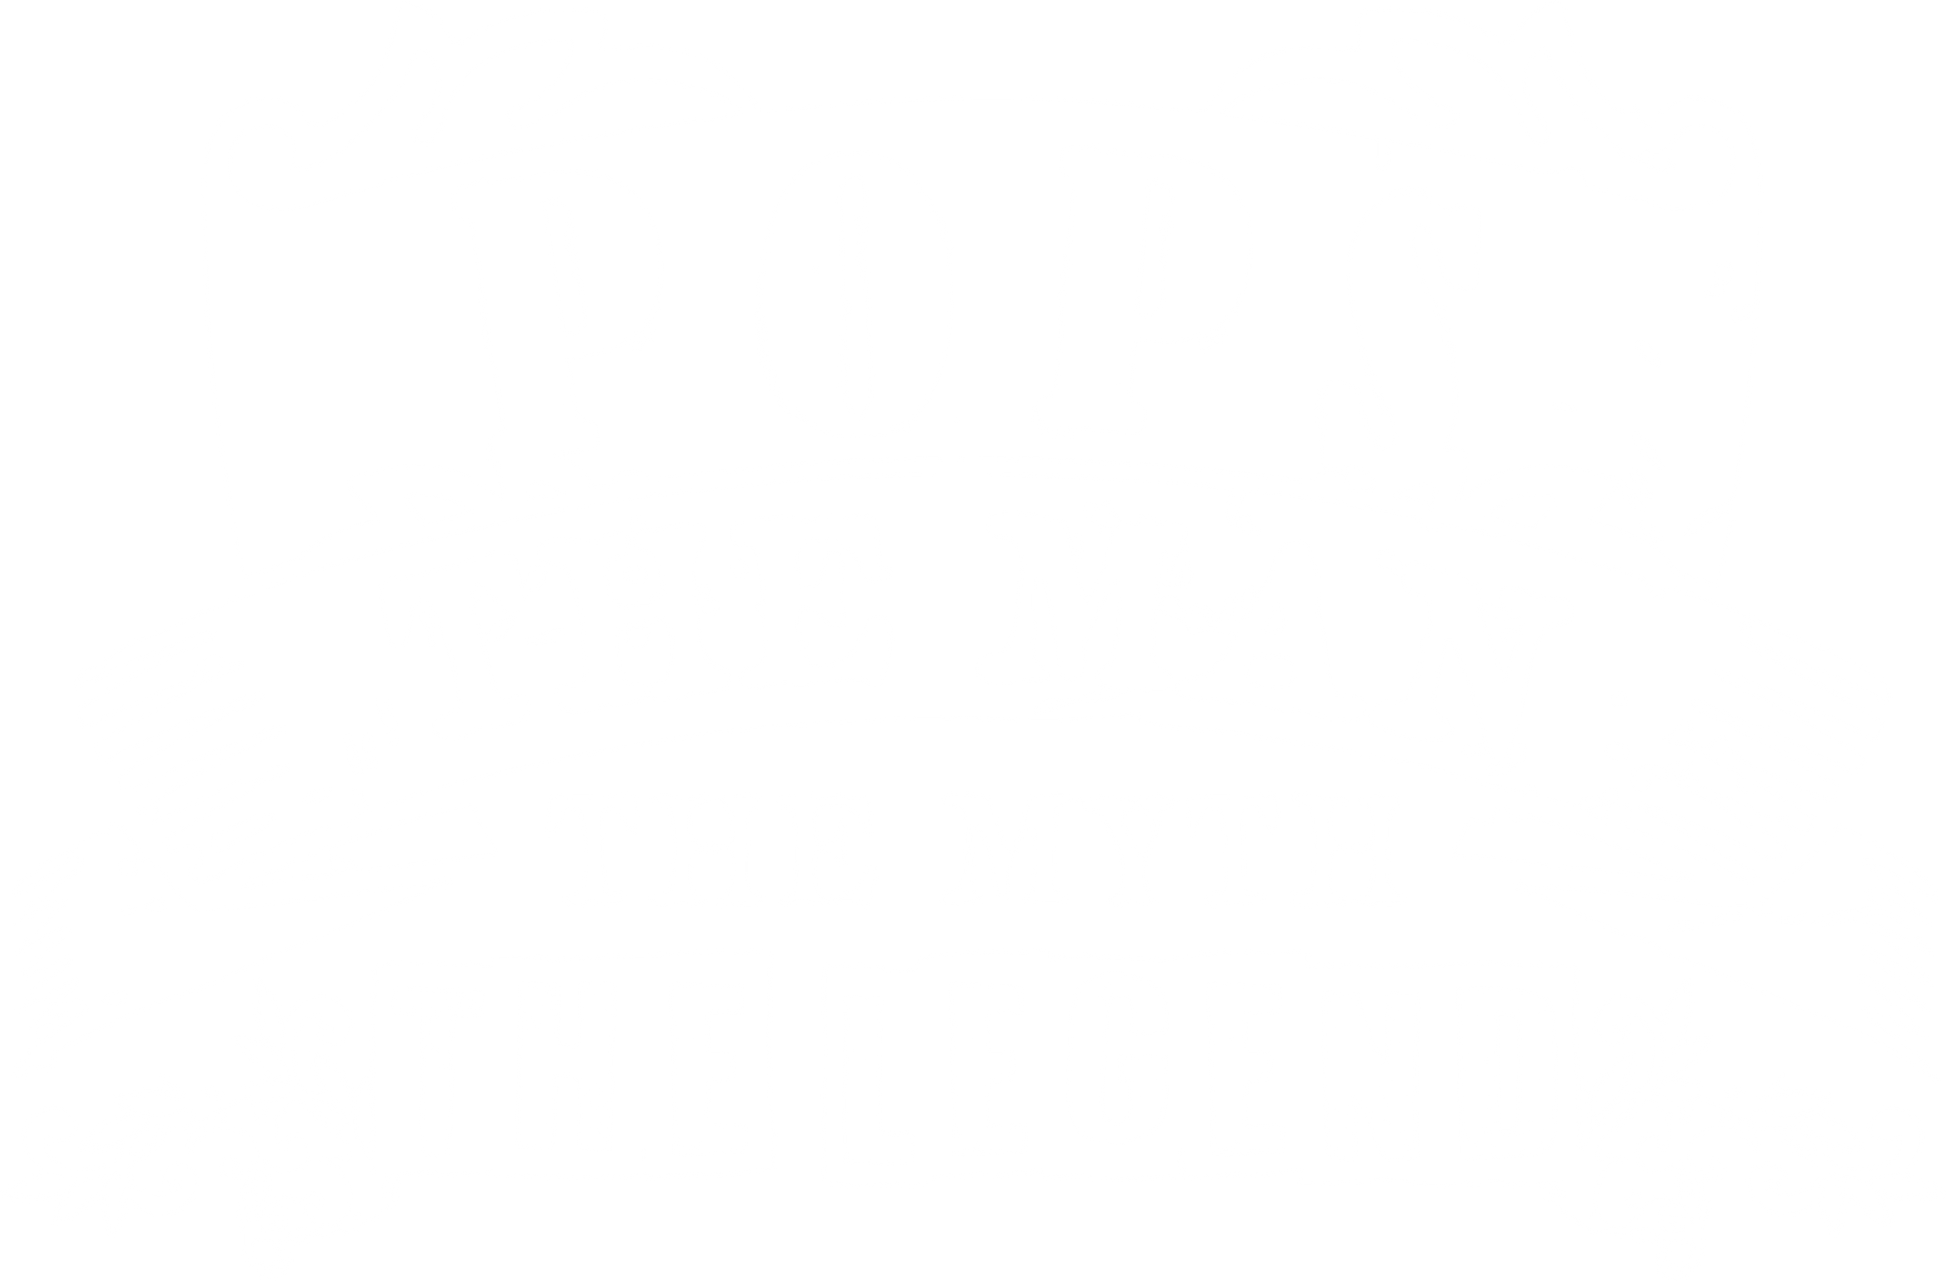 Funny T-Shirts design "Pops, The Man, The Myth, The Legend"